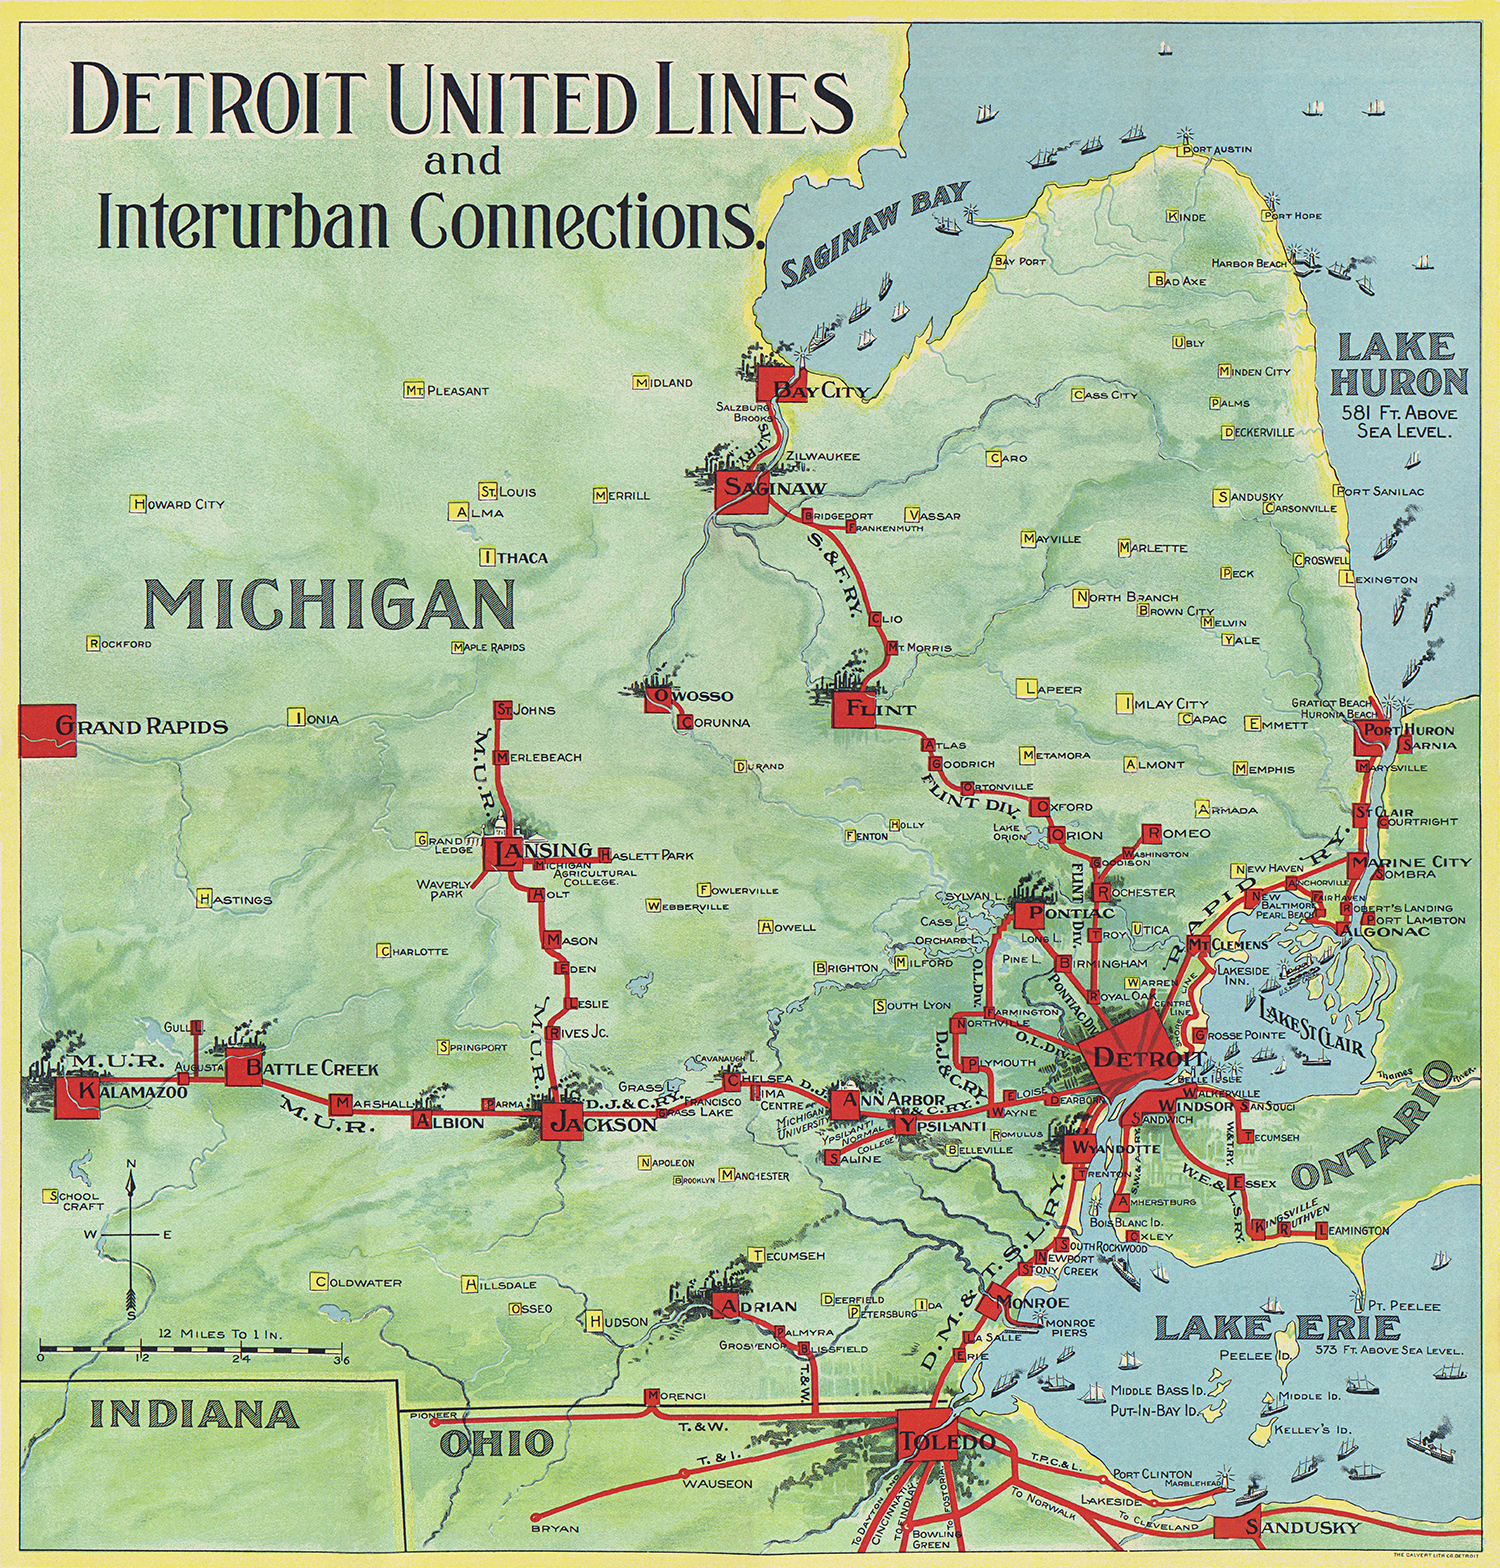 Indiana Interurban Railway Map 1911 Map Of Detroit United Lines And Interurban Connections – Transit Maps  Store